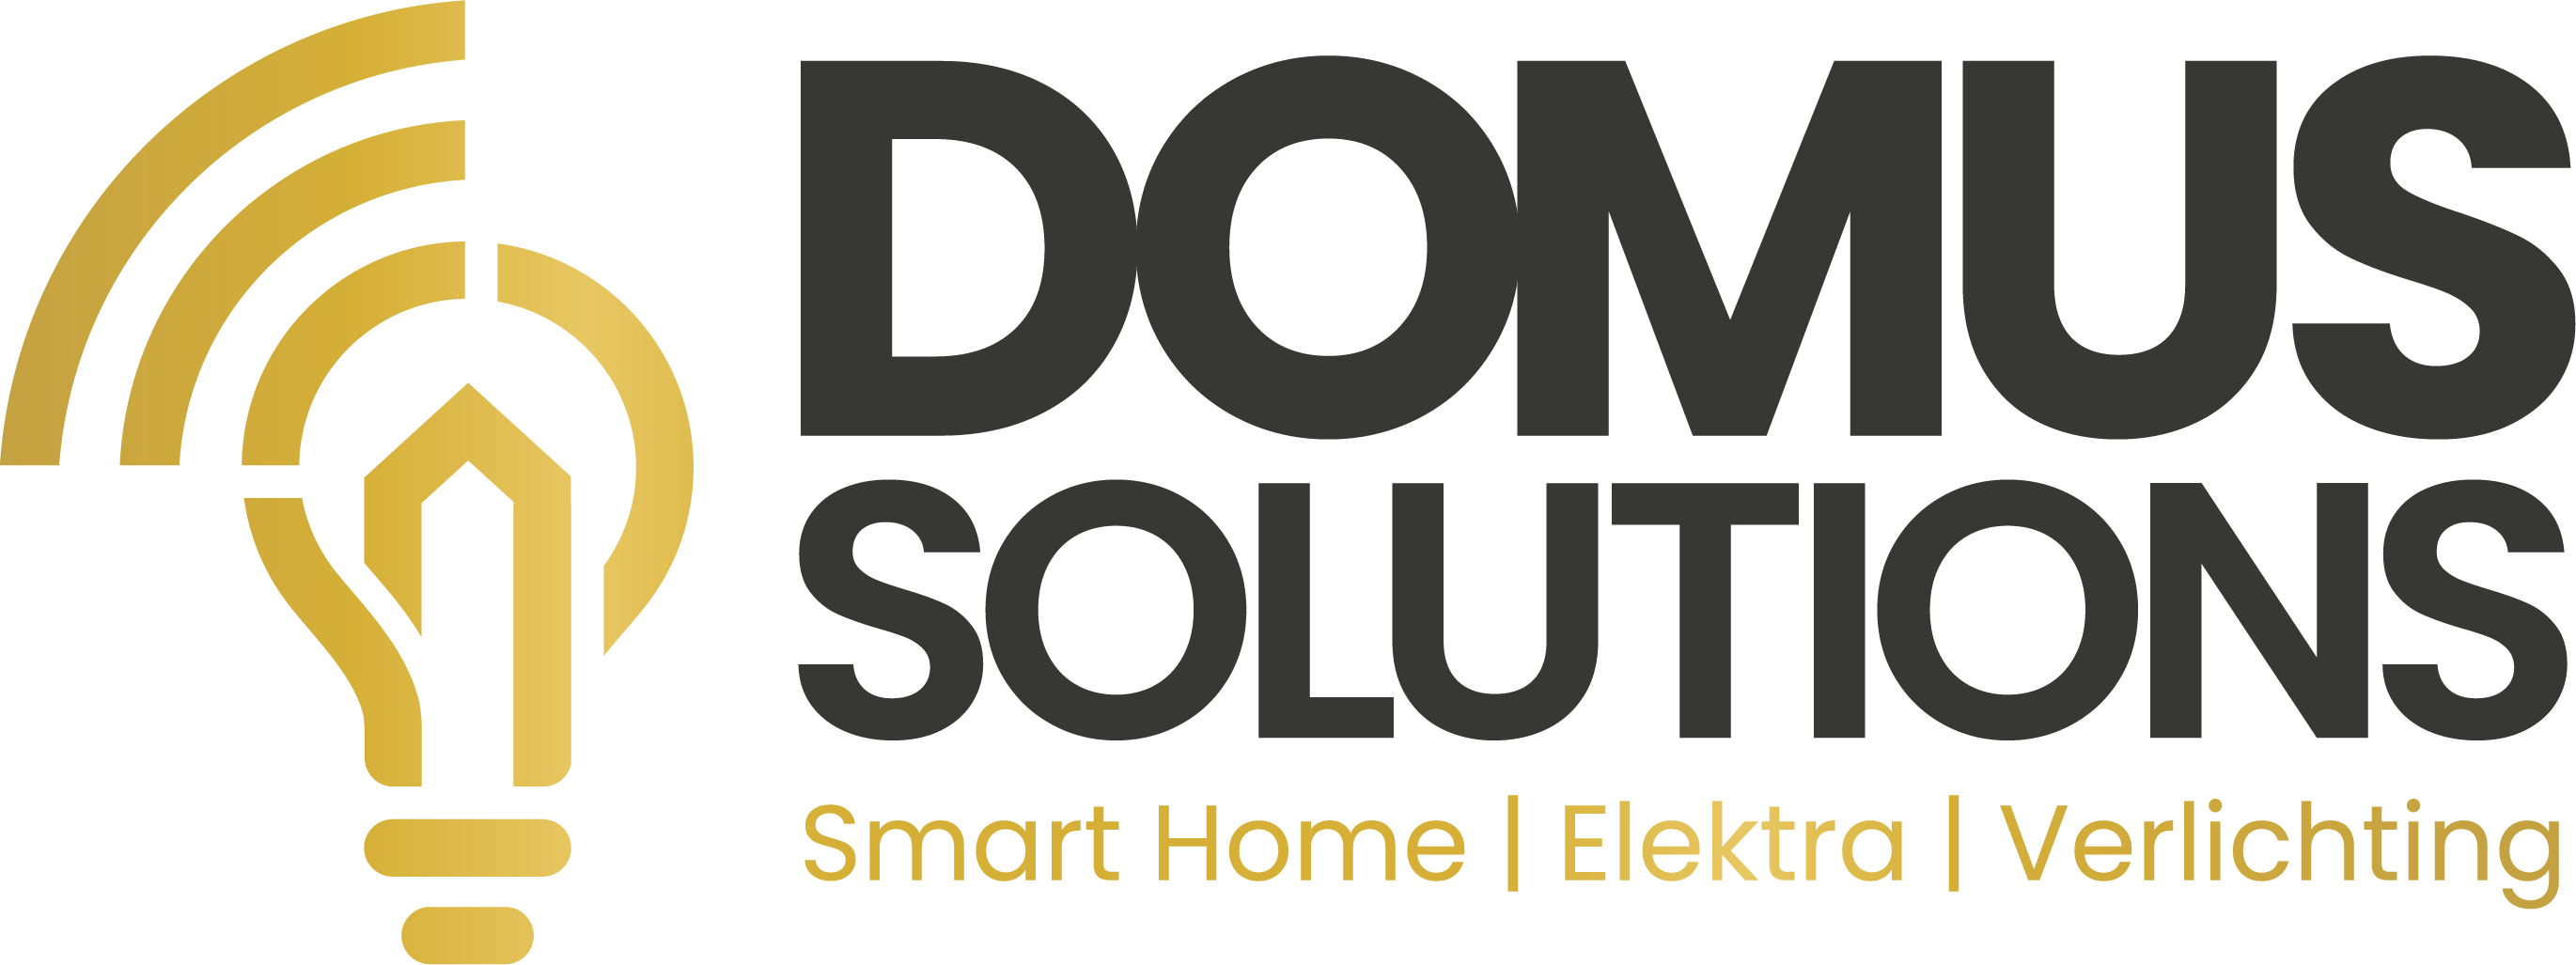 Domus Solutions